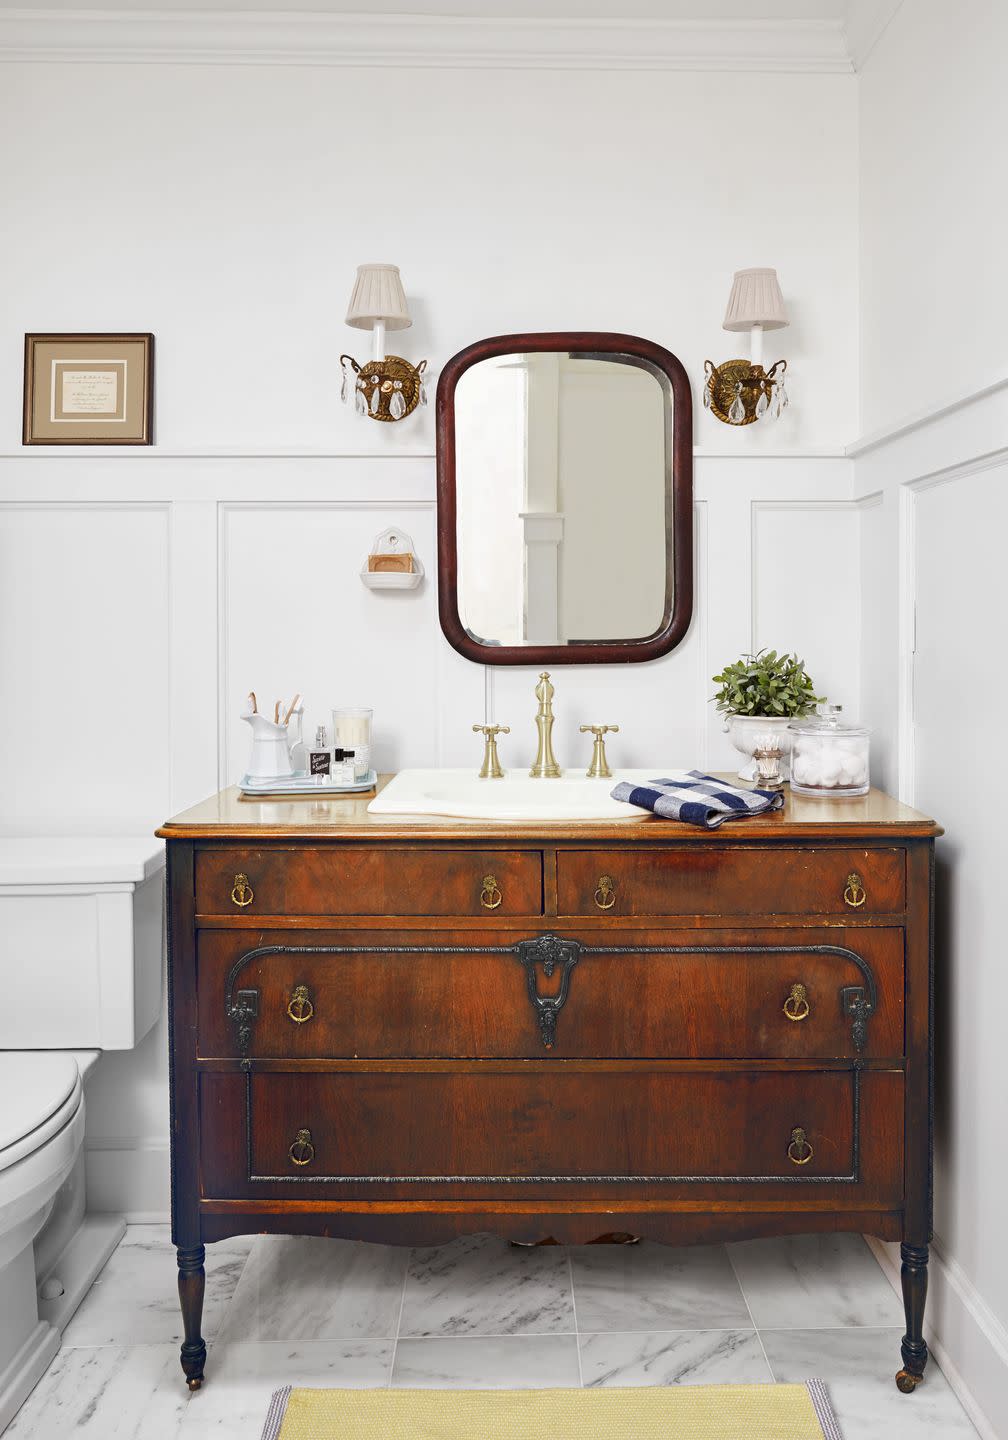 classically appointed bathroom with wooden vanity and marble floor